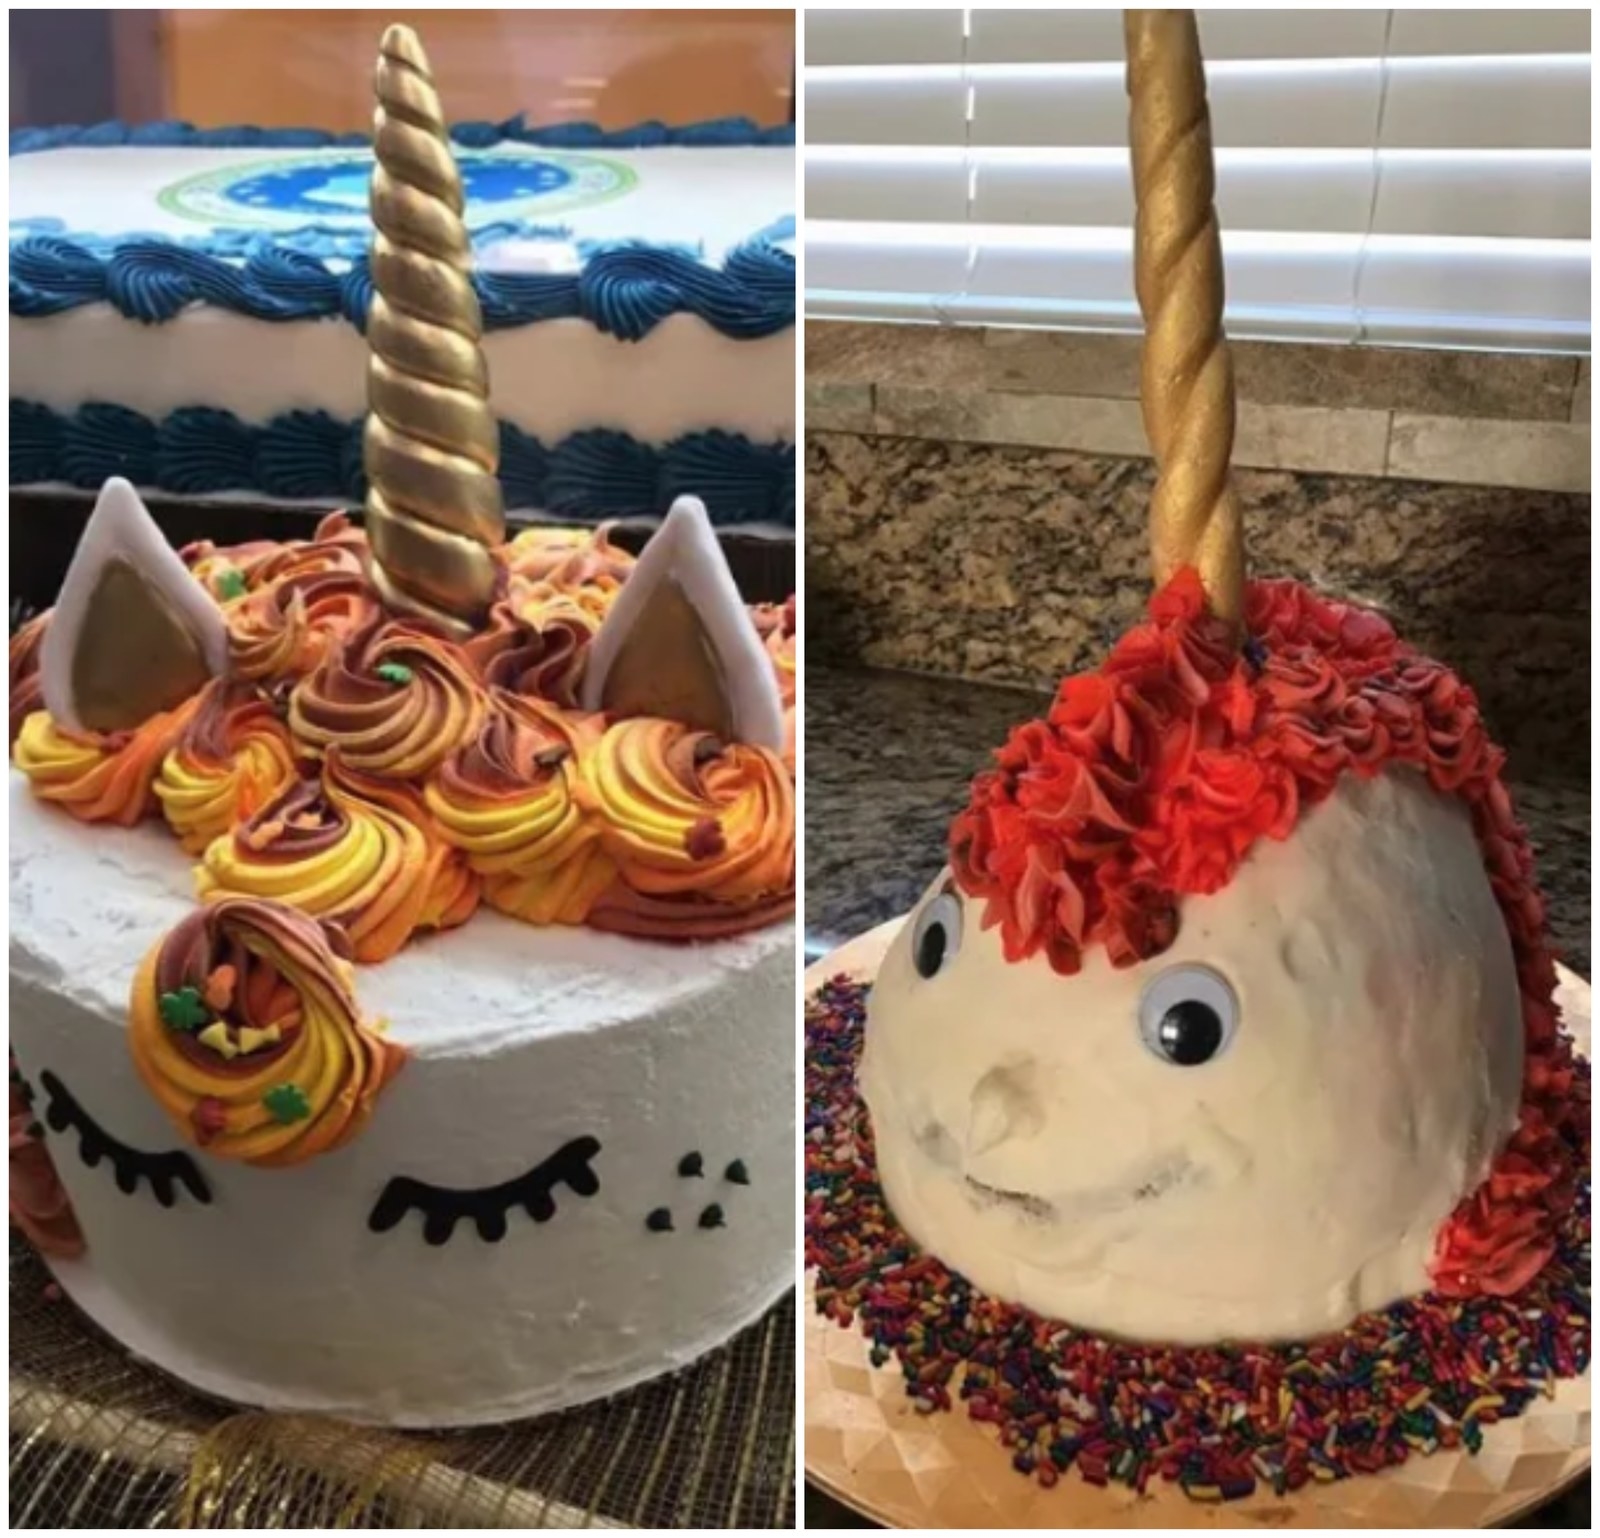 17 Cake Fails That'll Make You Cry Laughing